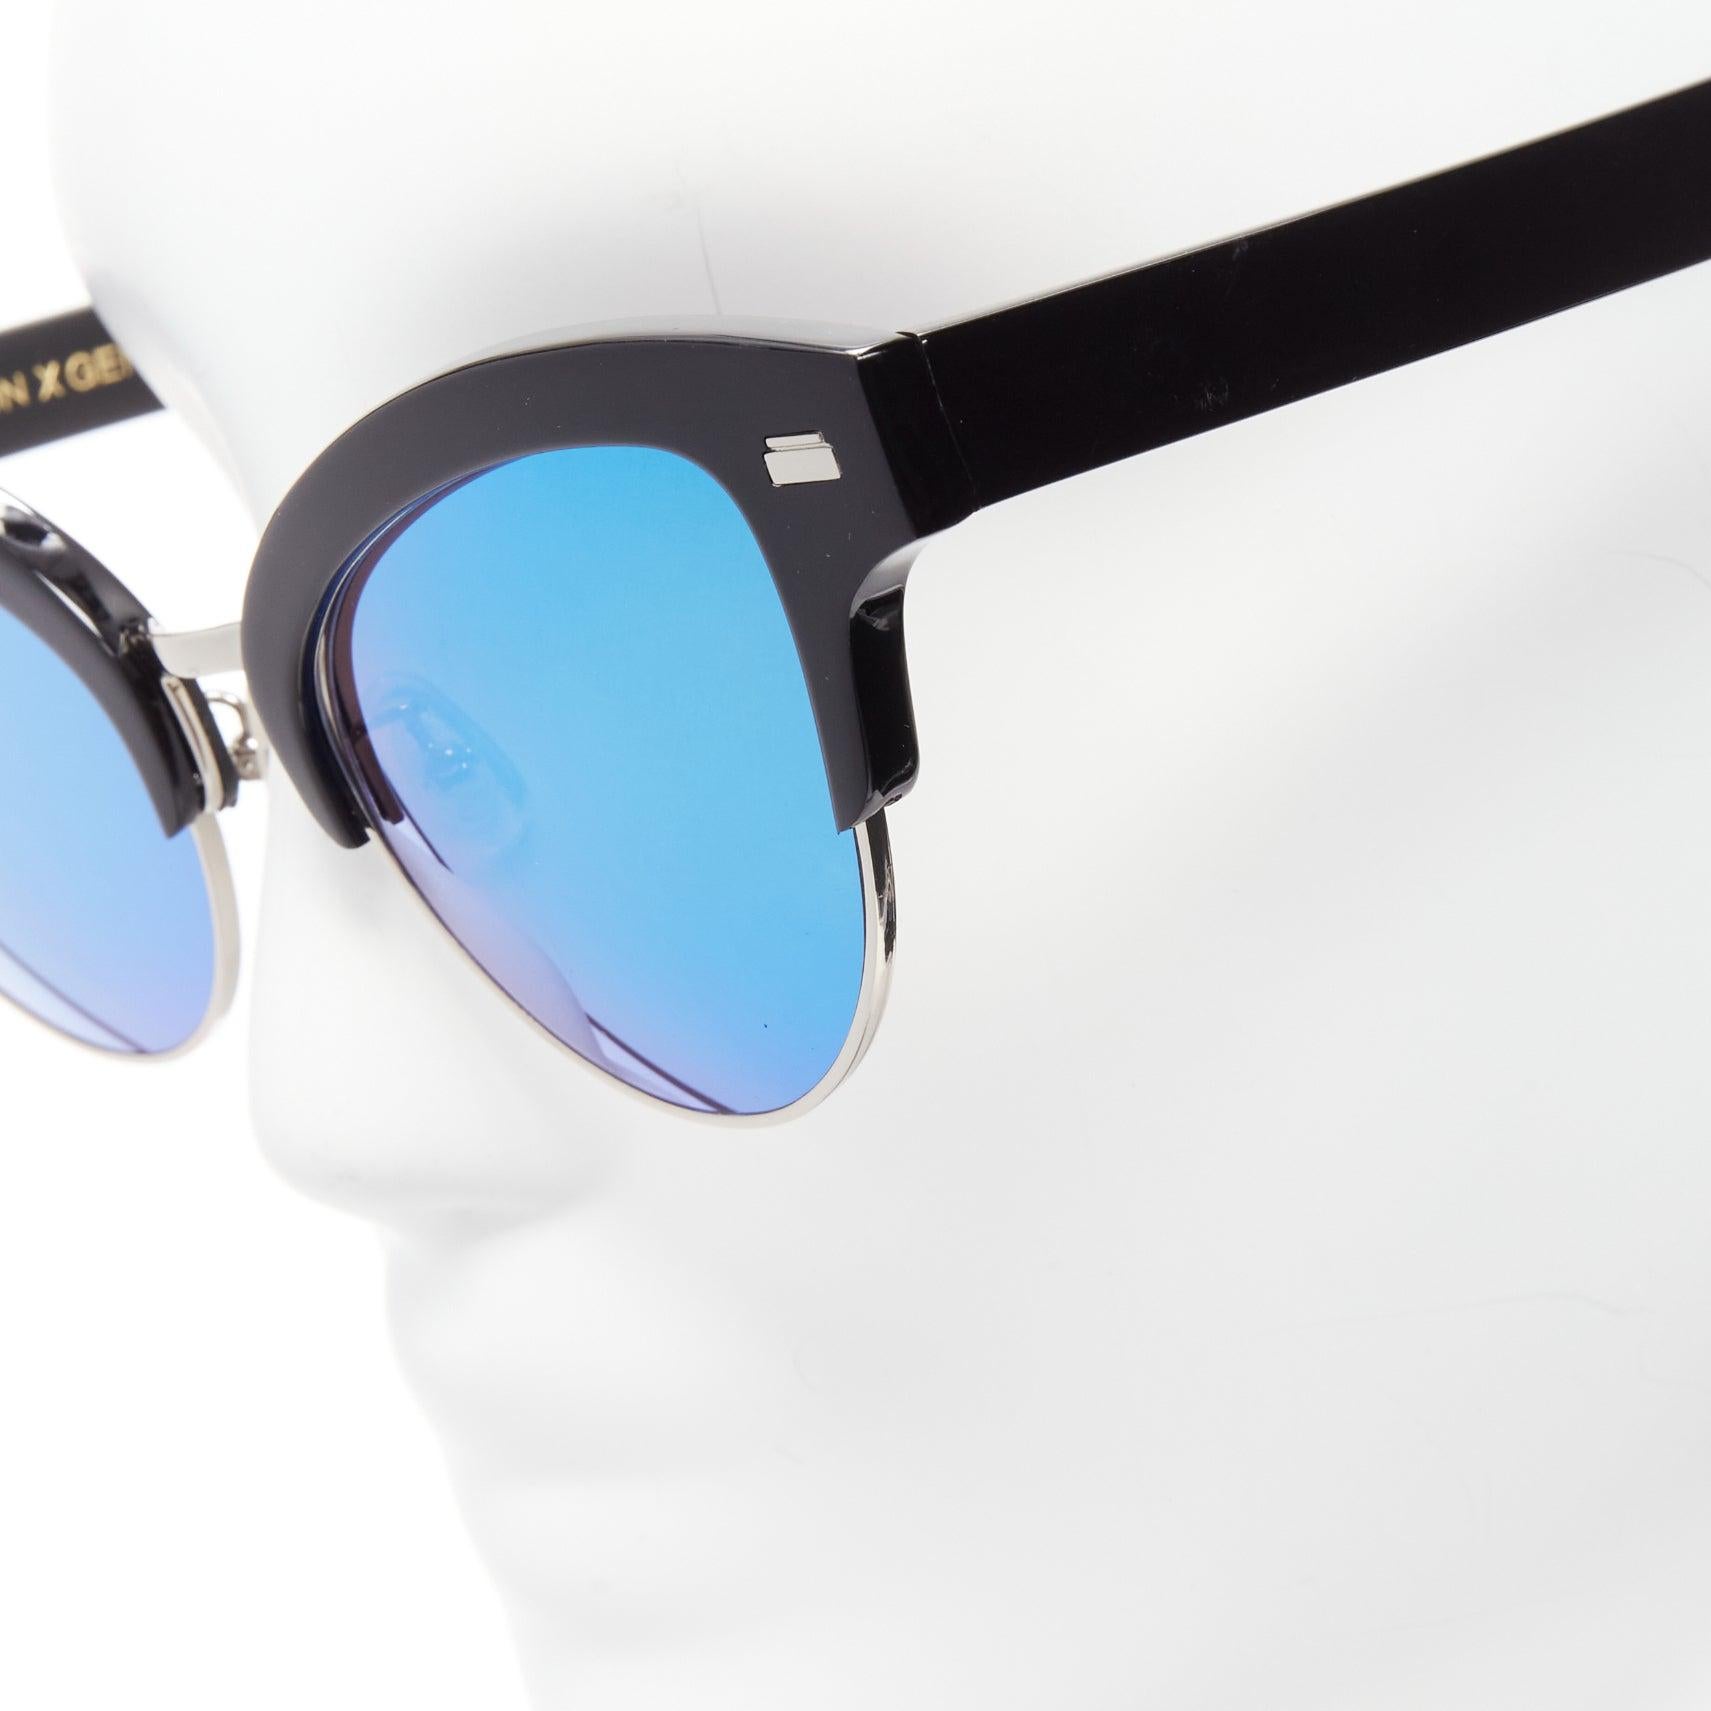 GENTLE MONSTER Pushbutton No.2 Inflexible J01 blue lens cat eye sunglasses
Reference: BSHW/A00106
Brand: Gentle Monster
Model: No.2 Inflexible J01
Collection: Pushbutton
Material: Acrylic
Color: Black, Blue
Pattern: Solid
Lining: Black Acrylic
Extra